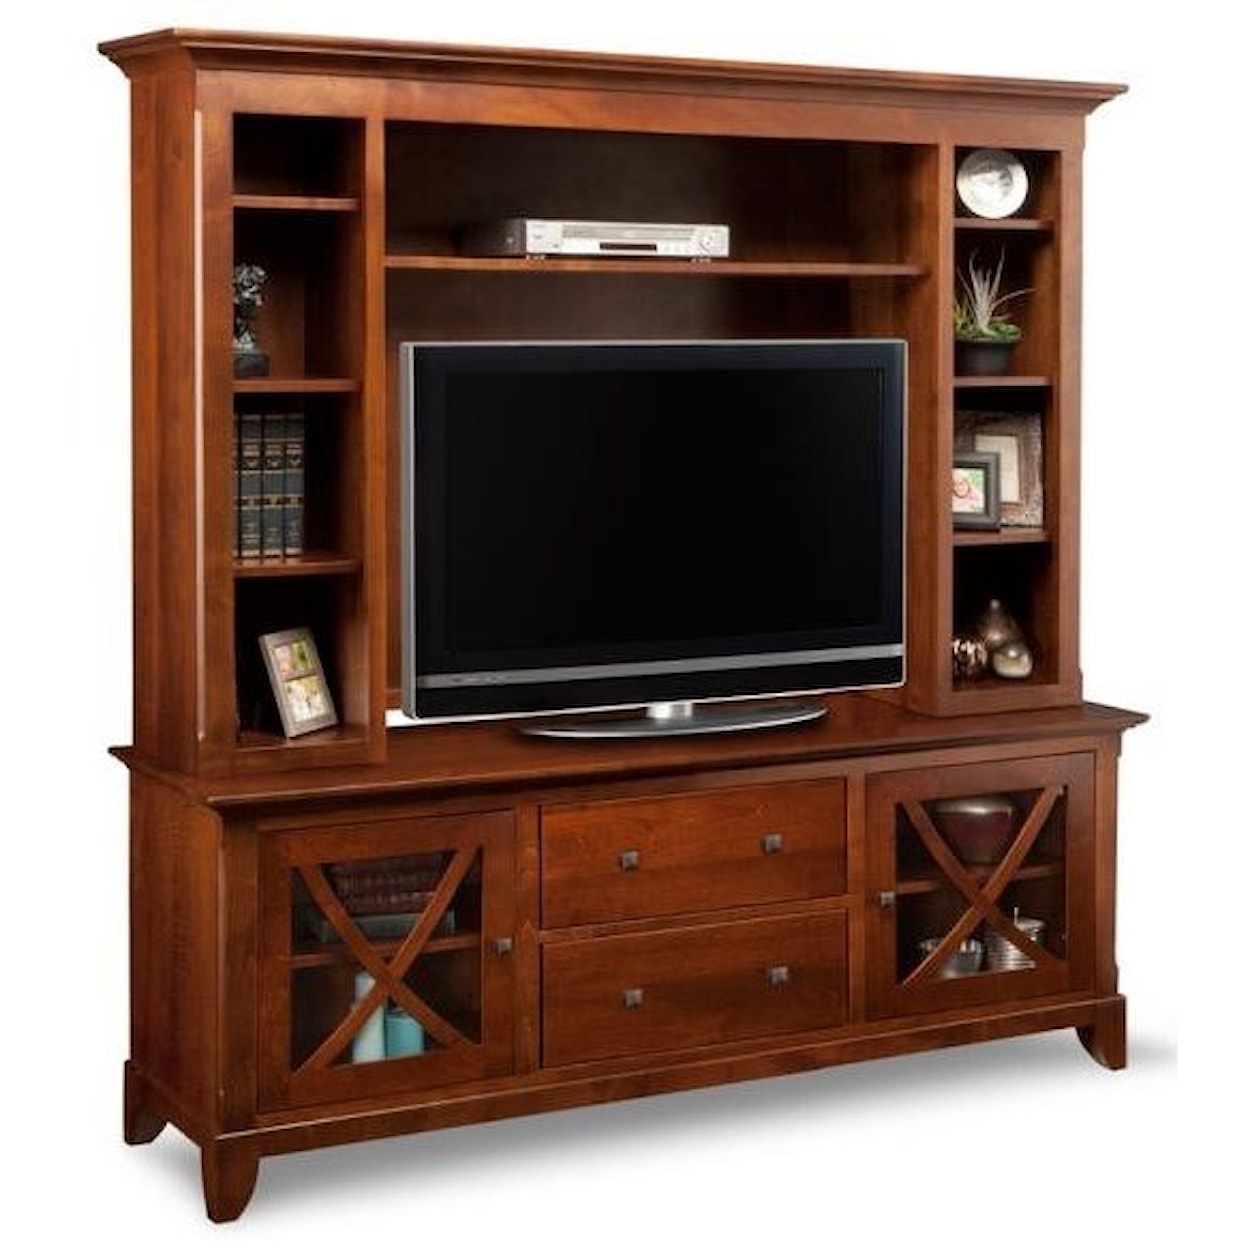 Handstone Florence 75" HDTV Cabinet with Hutch